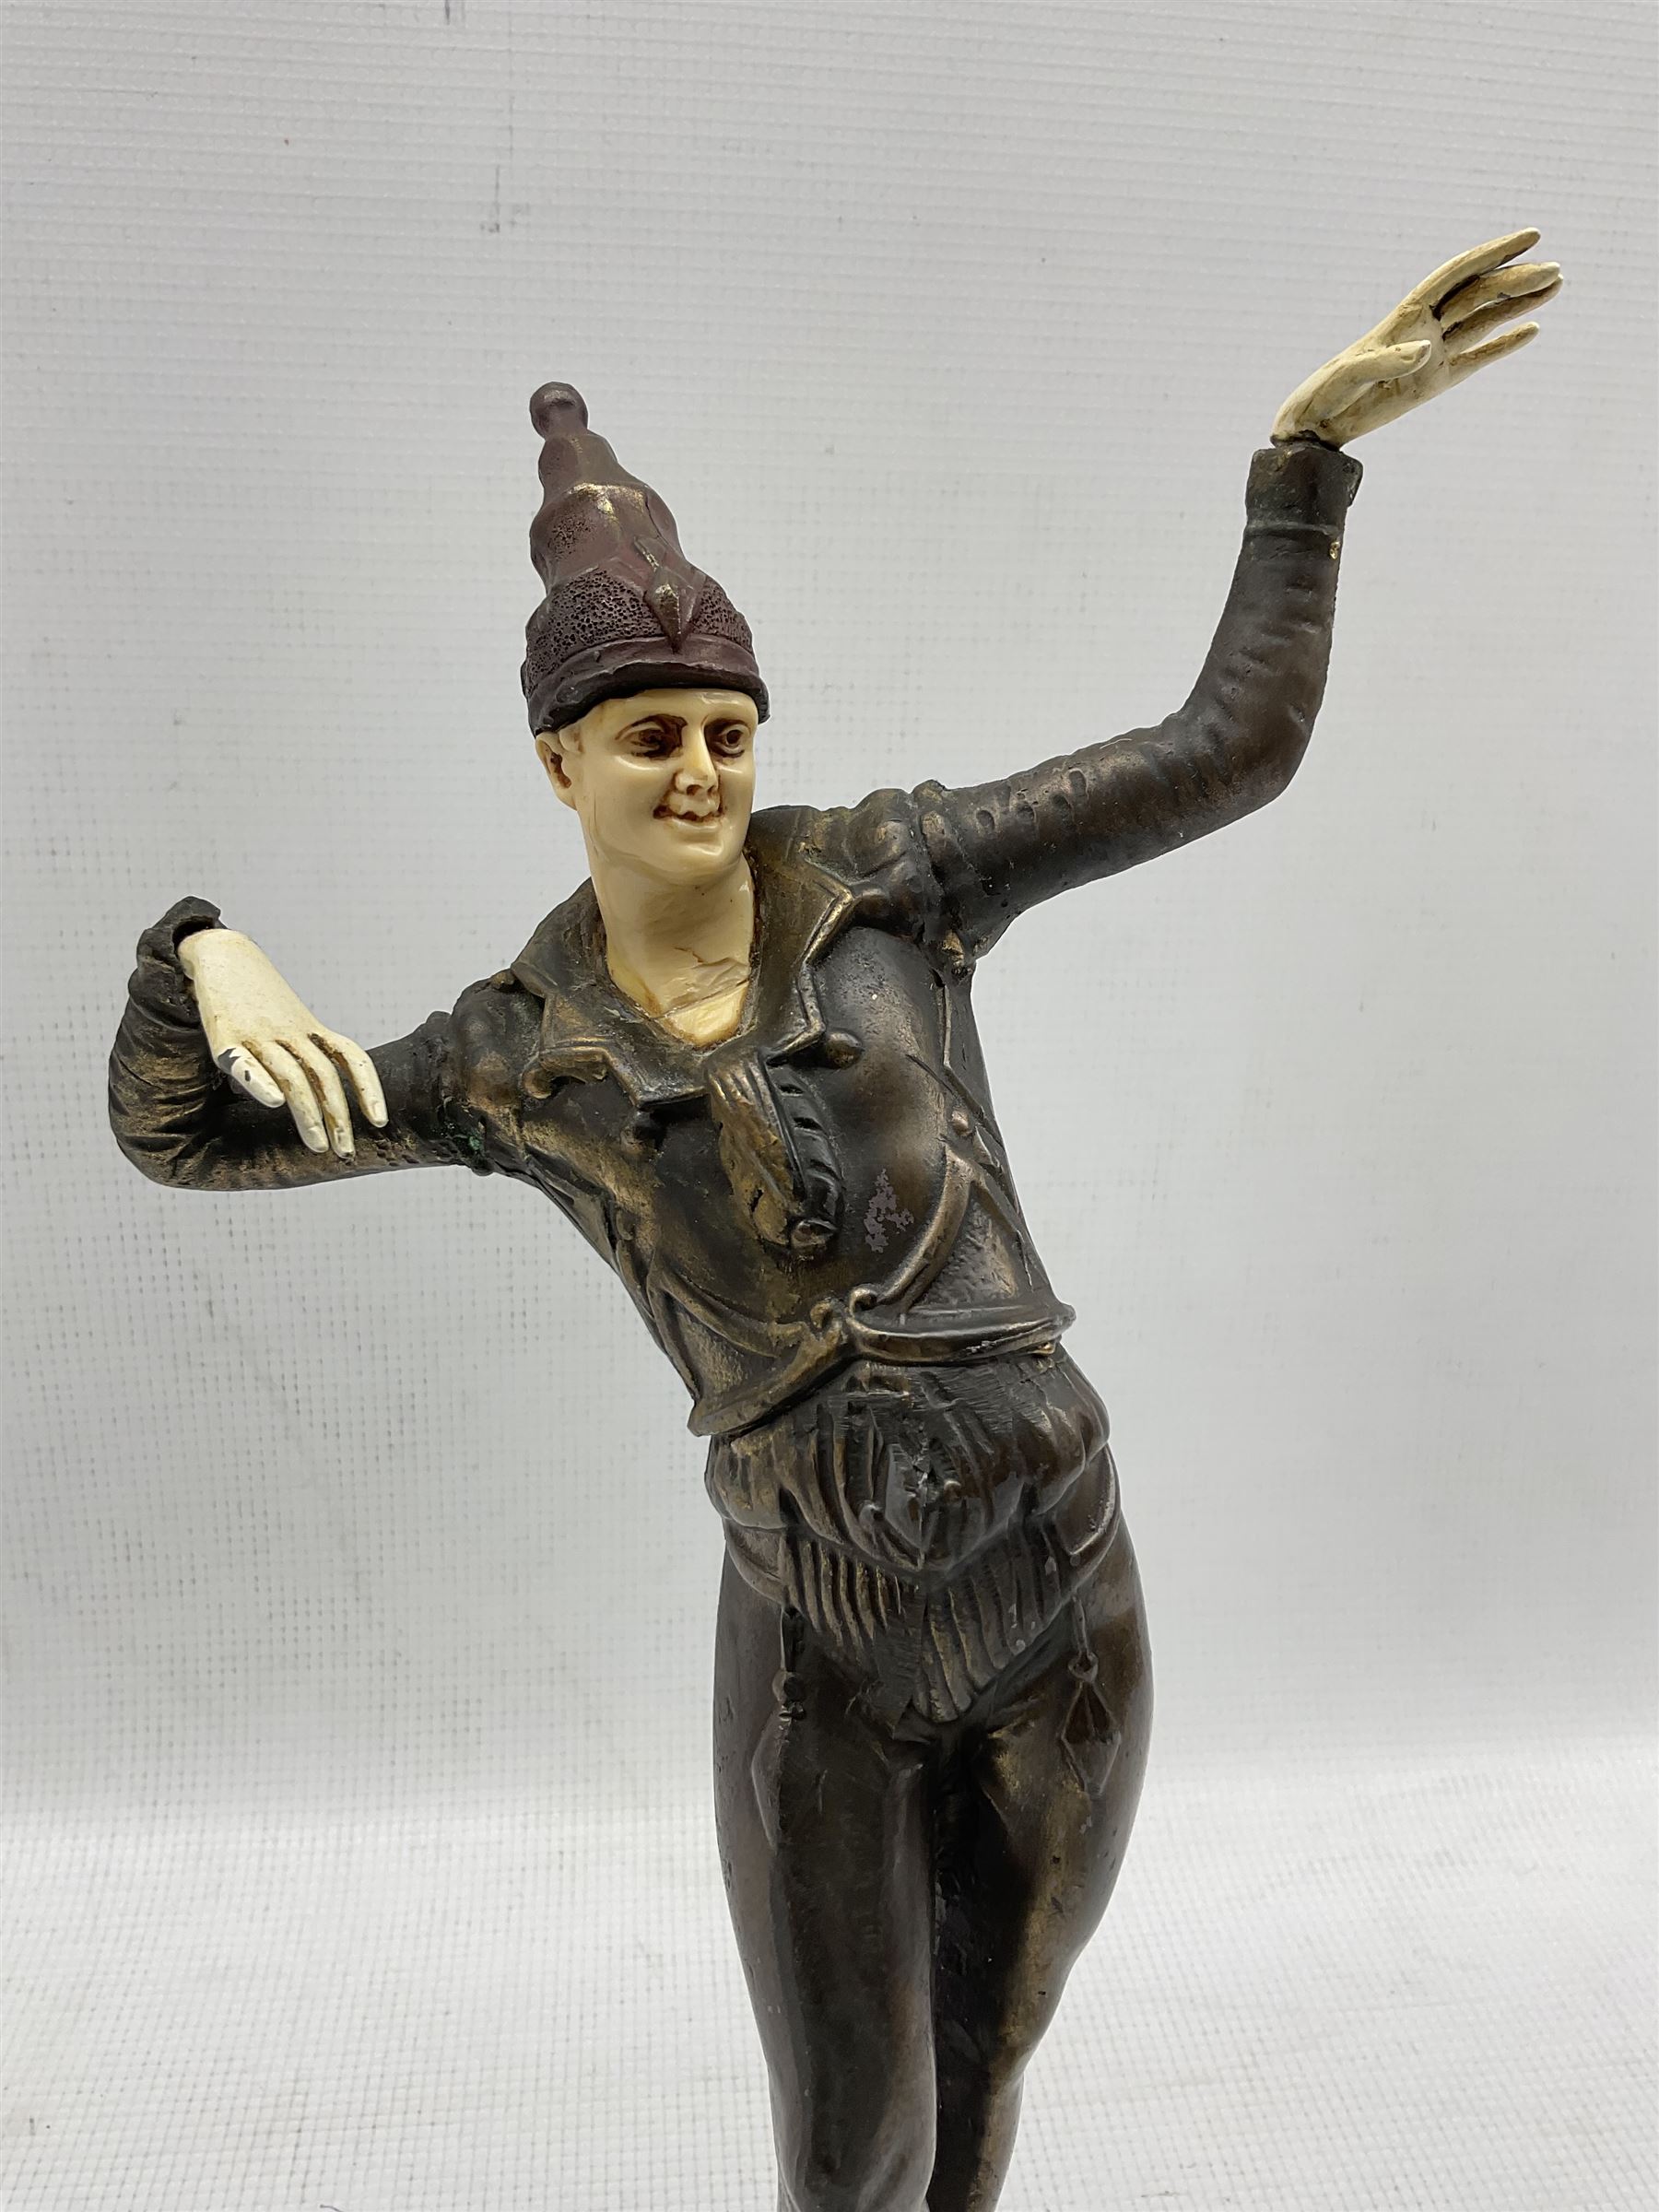 Art Deco style bronzed figure of a clown mounted on an onyx plinth - Image 2 of 3